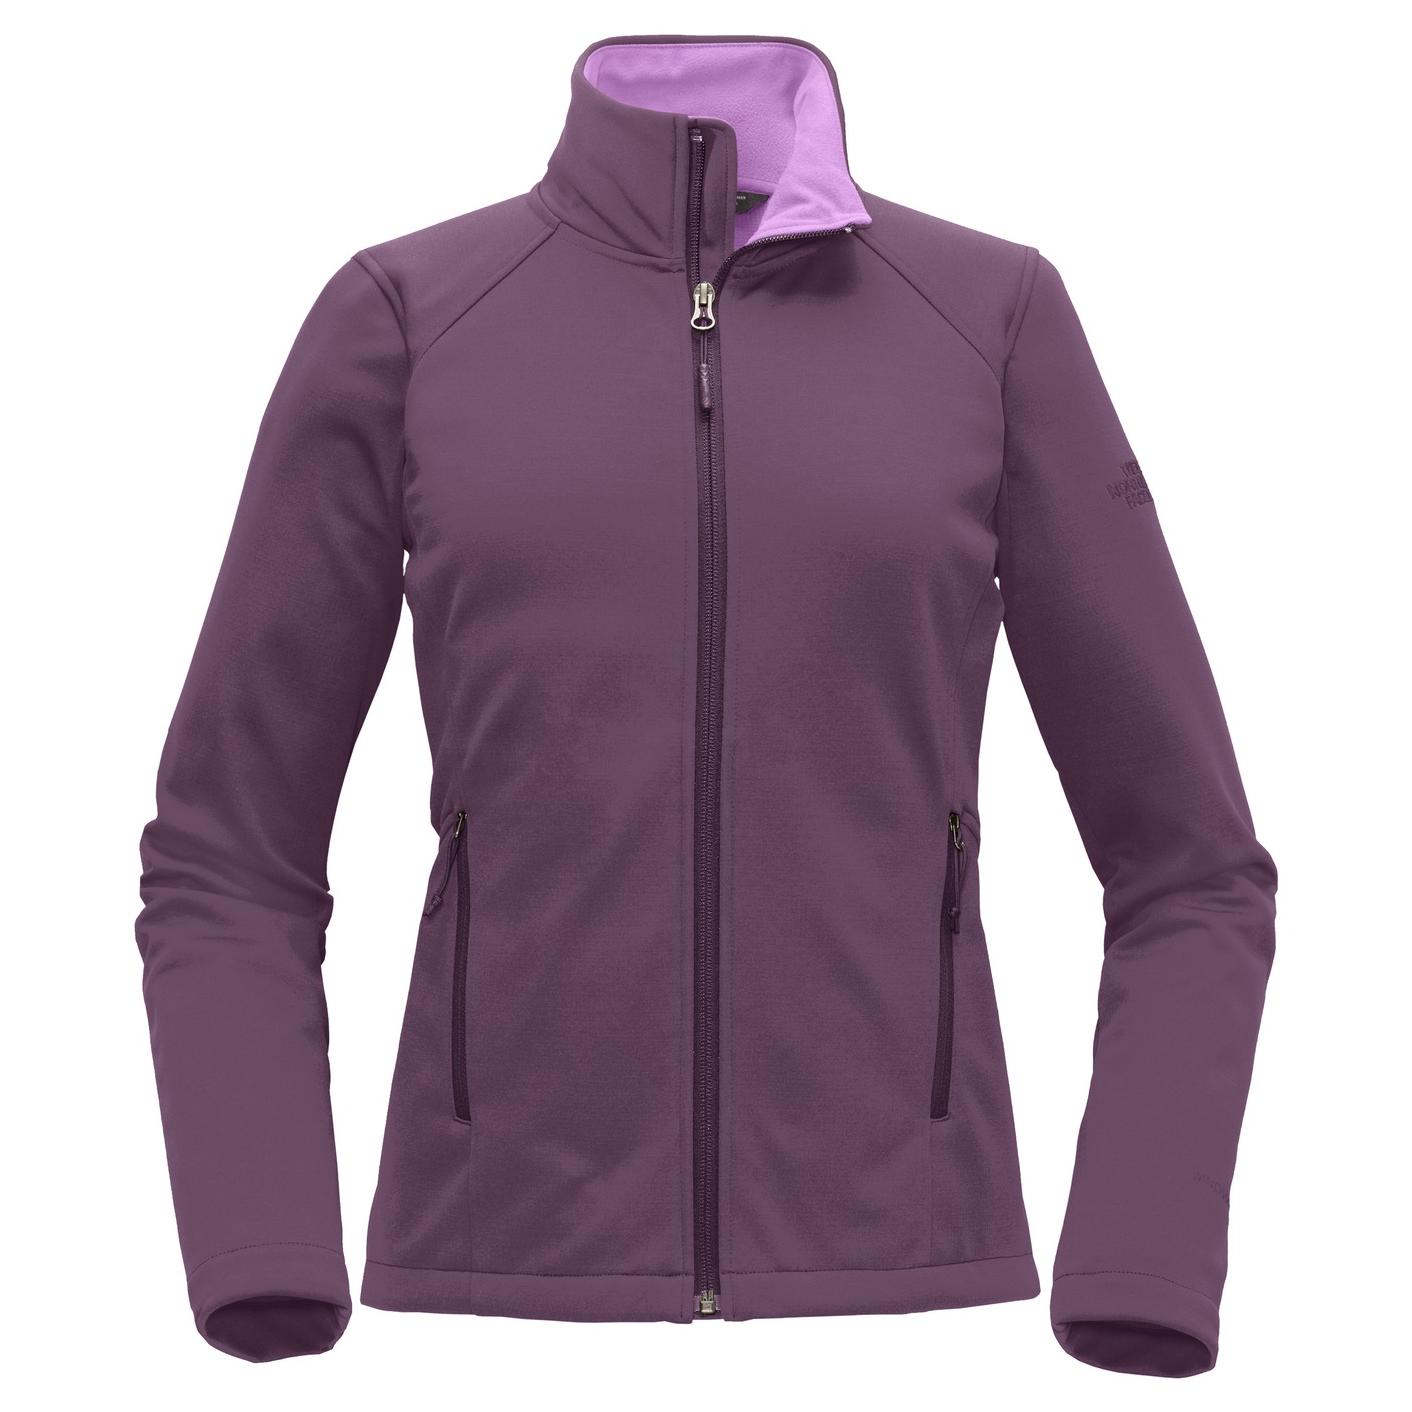 The North Face NF0A3LGY Ladies Ridgeline Soft Shell Jacket - Blackberry ...